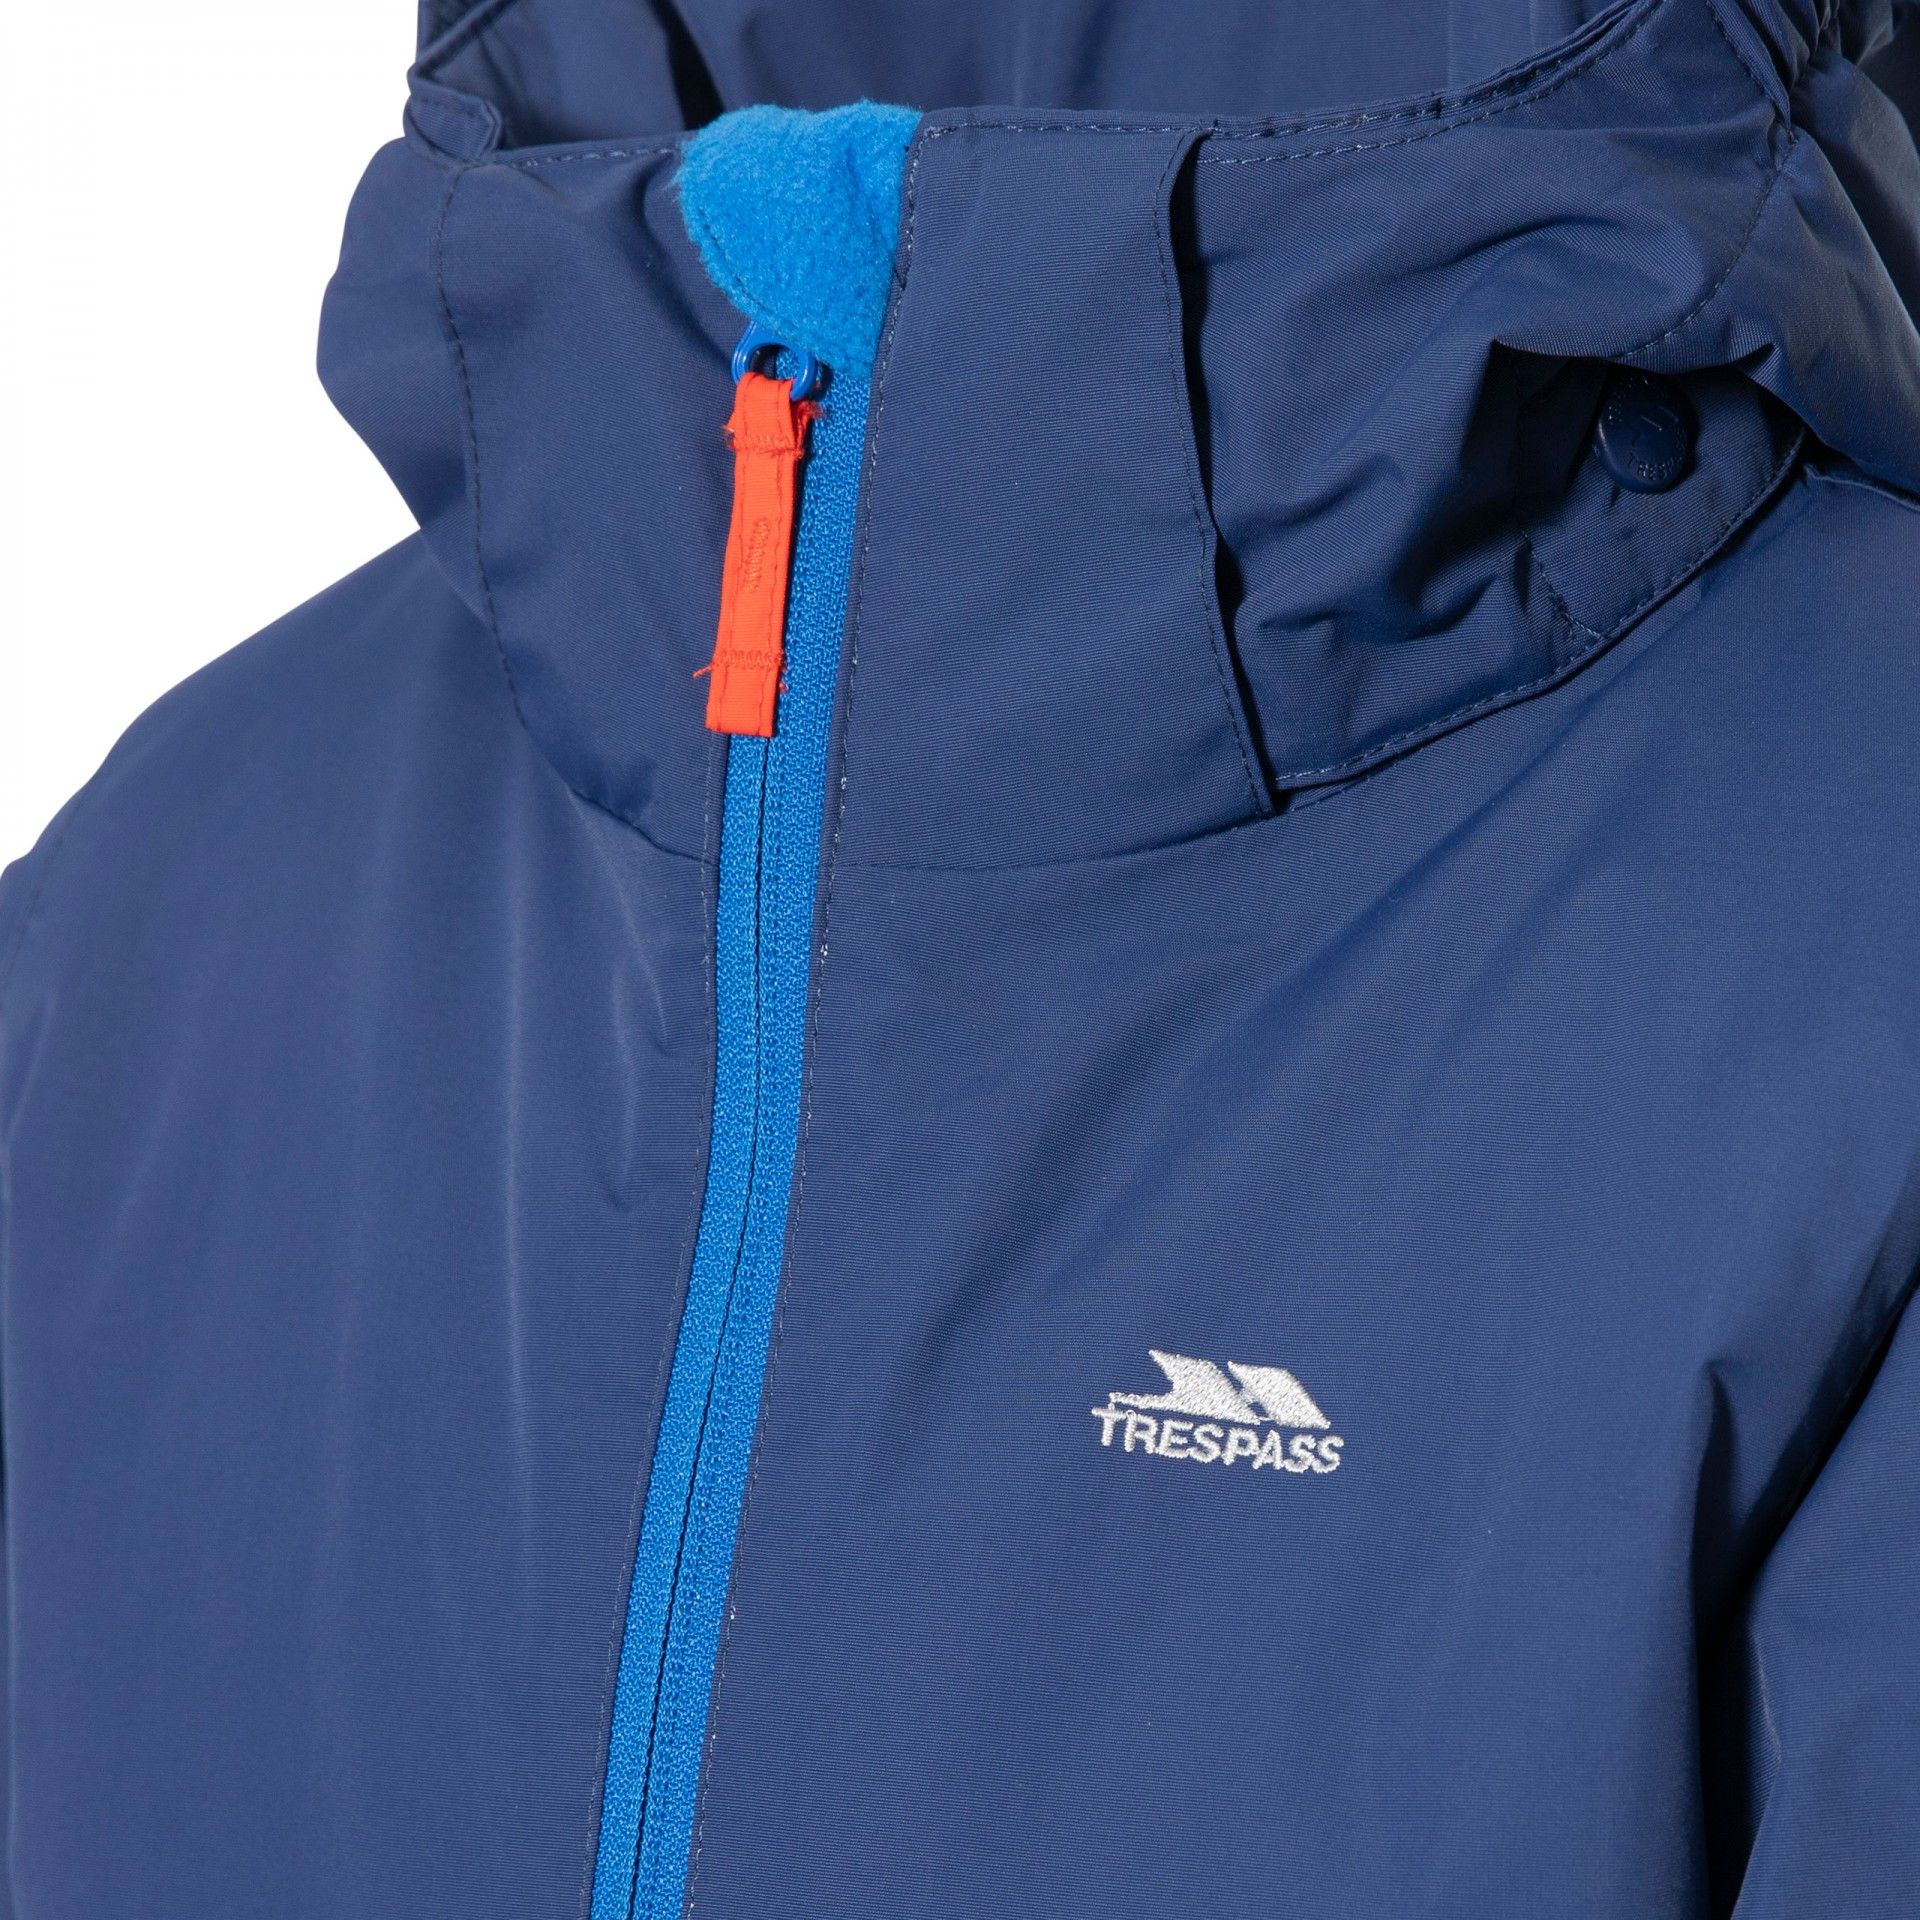 Material: 100% polyamide PU. Wato kids` ski jackets are expertly woven with a padded shell and feature a detachable hood. It also features a full zip front fastening, long sleeves with adjustable touch fastening cuffs, a zip pocket at the sleeve, 2 lower zip pockets and an inner snowskirt. The ski jacket boasts expert coldheat technology, 5000mm of waterproof protection, 5000mvp breathability and windproofing too. Height size to fit: (2-3 Yrs): 92-98cm, (3-4 Yrs): 98-104cm, (5-6 Yrs): 110-116cm, (7-8 Yrs): 122-128cm, (9-10 Yrs): 134-40cm, (11-12 Yrs): 146-152cm, (13-14 Yrs): 158-164cm, (15-16 Yrs): 170-176cm. Waist size to fit: (2-3 Yrs): 50.5cm, (3-4 Yrs): 53cm, (5-6 Yrs): 56cm, (7-8 Yrs): 58.5cm, (9-10 Yrs): 61cm, (11-12 Yrs): 66cm, (13-14 Yrs): 71cm, (15-16 Yrs): 73.5cm.